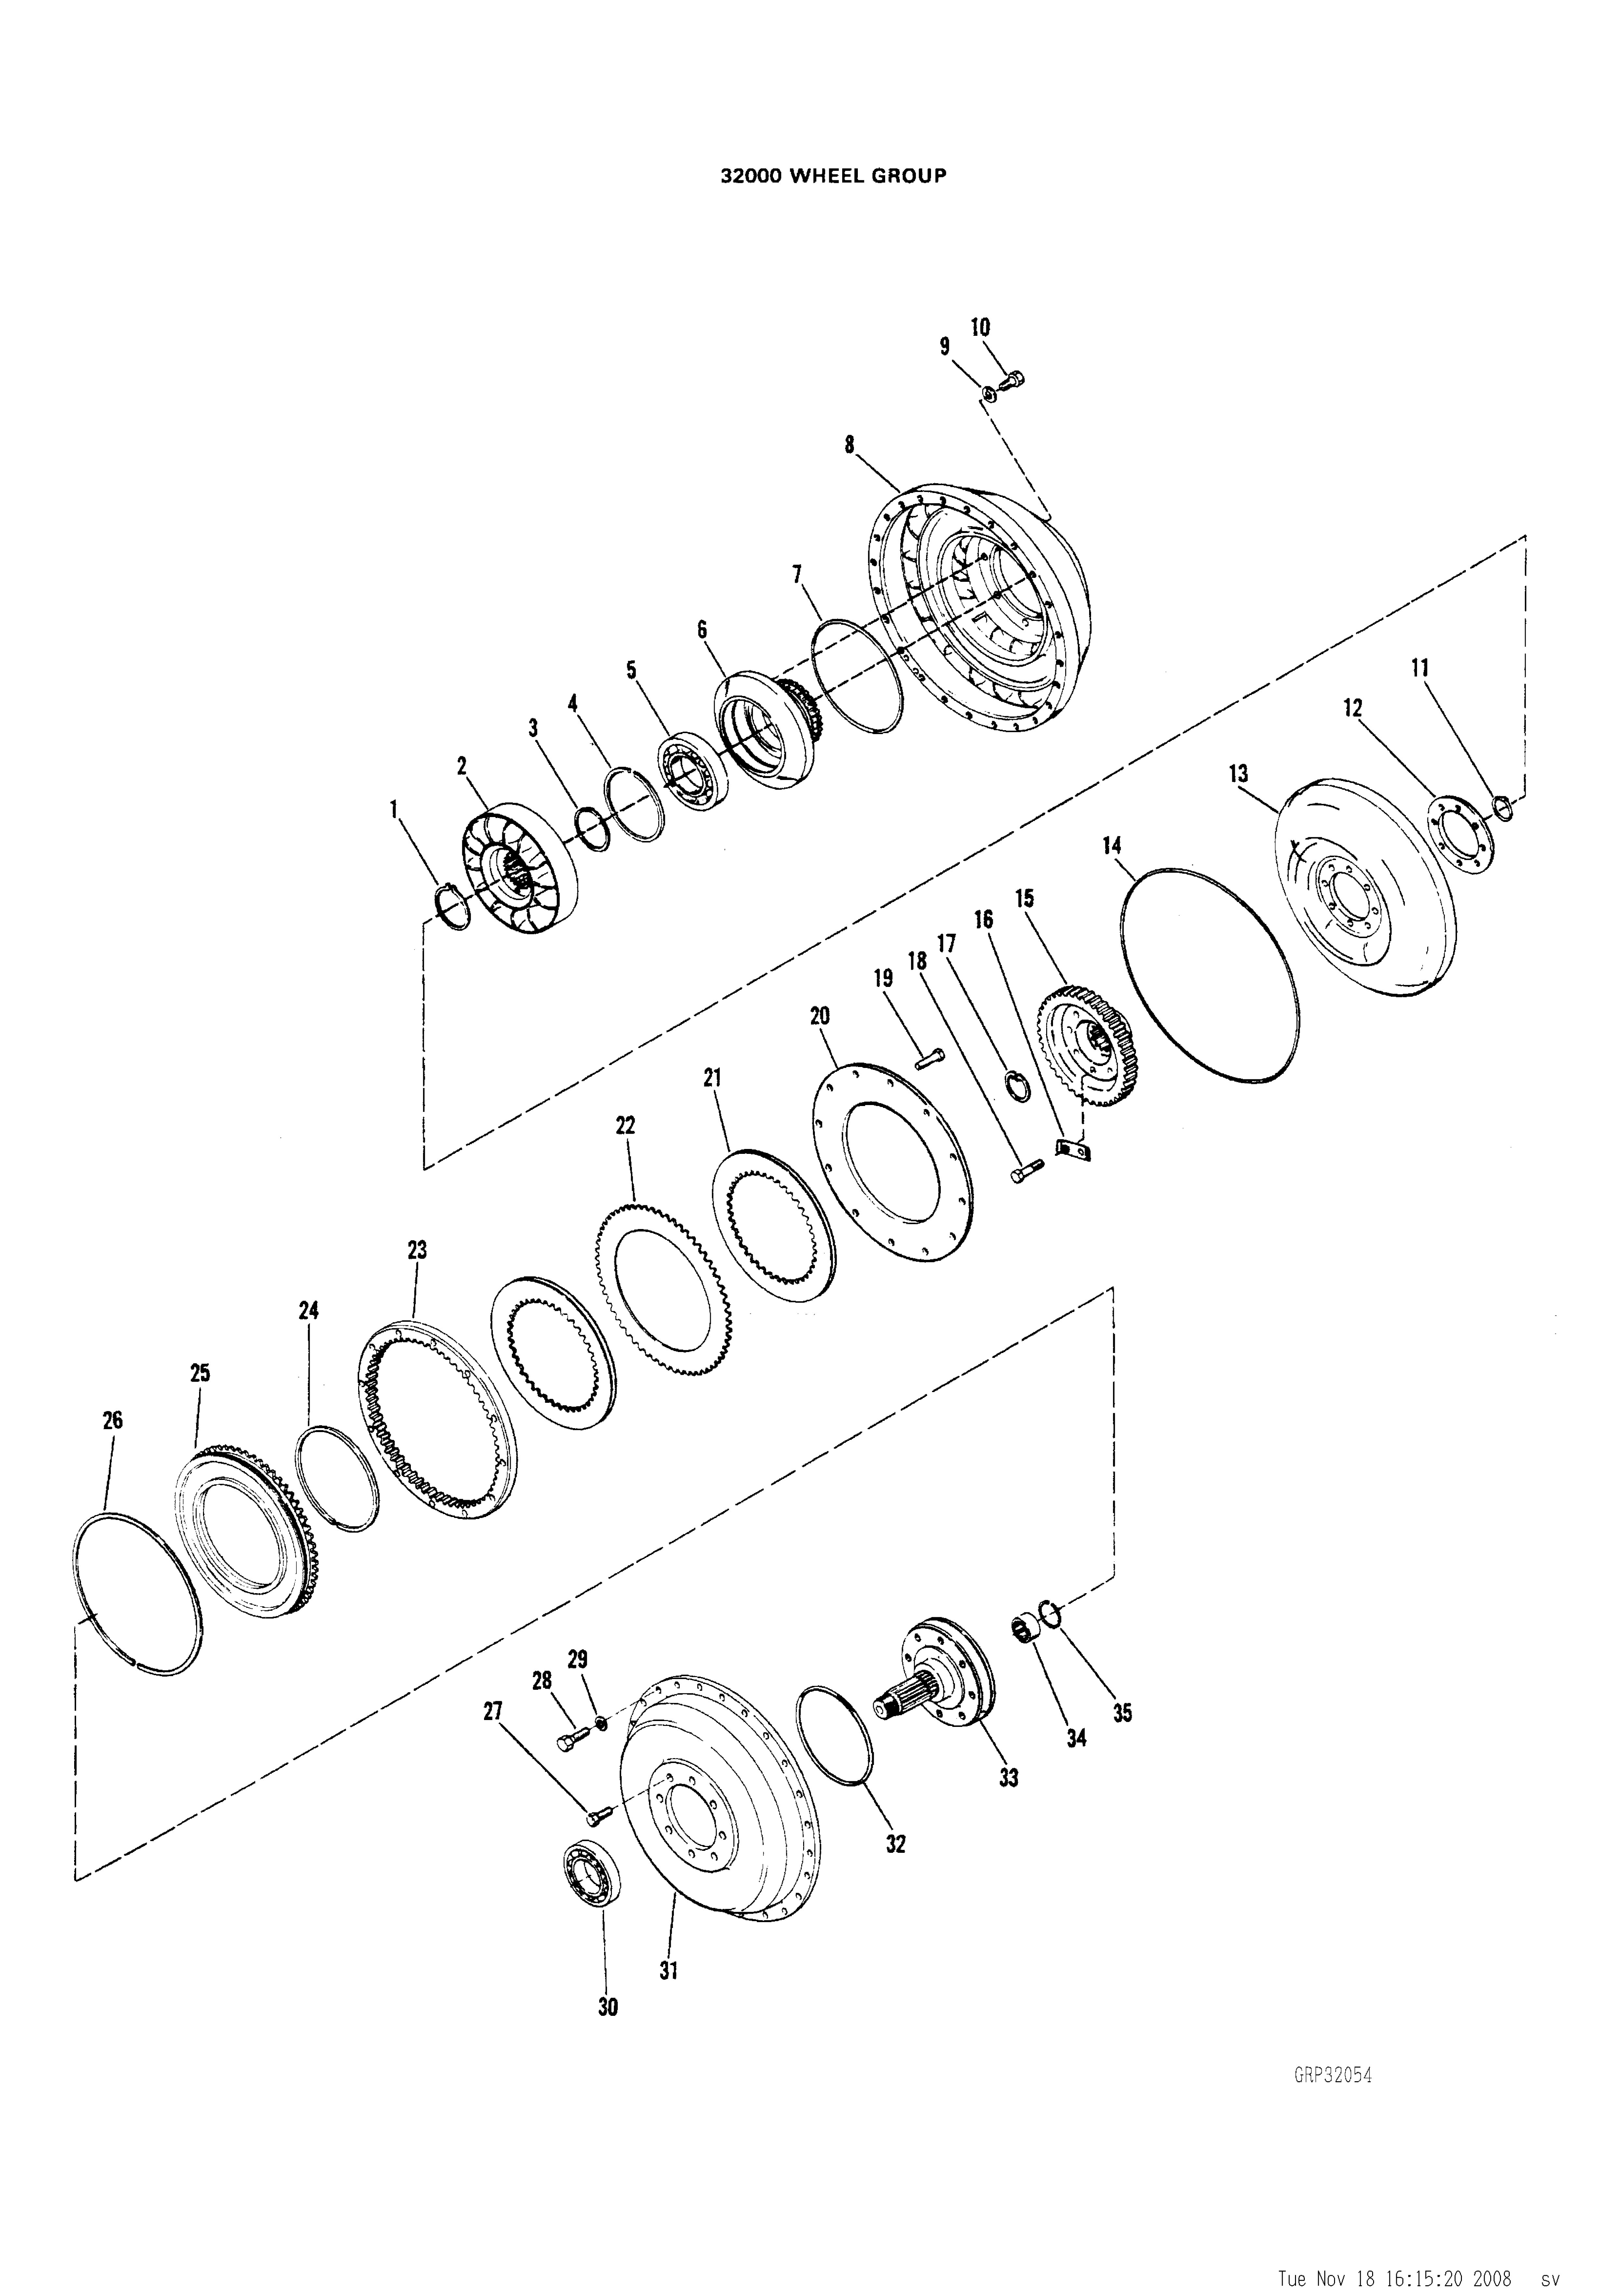 drawing for HARSCO 4001138-017 - BEARING (figure 2)